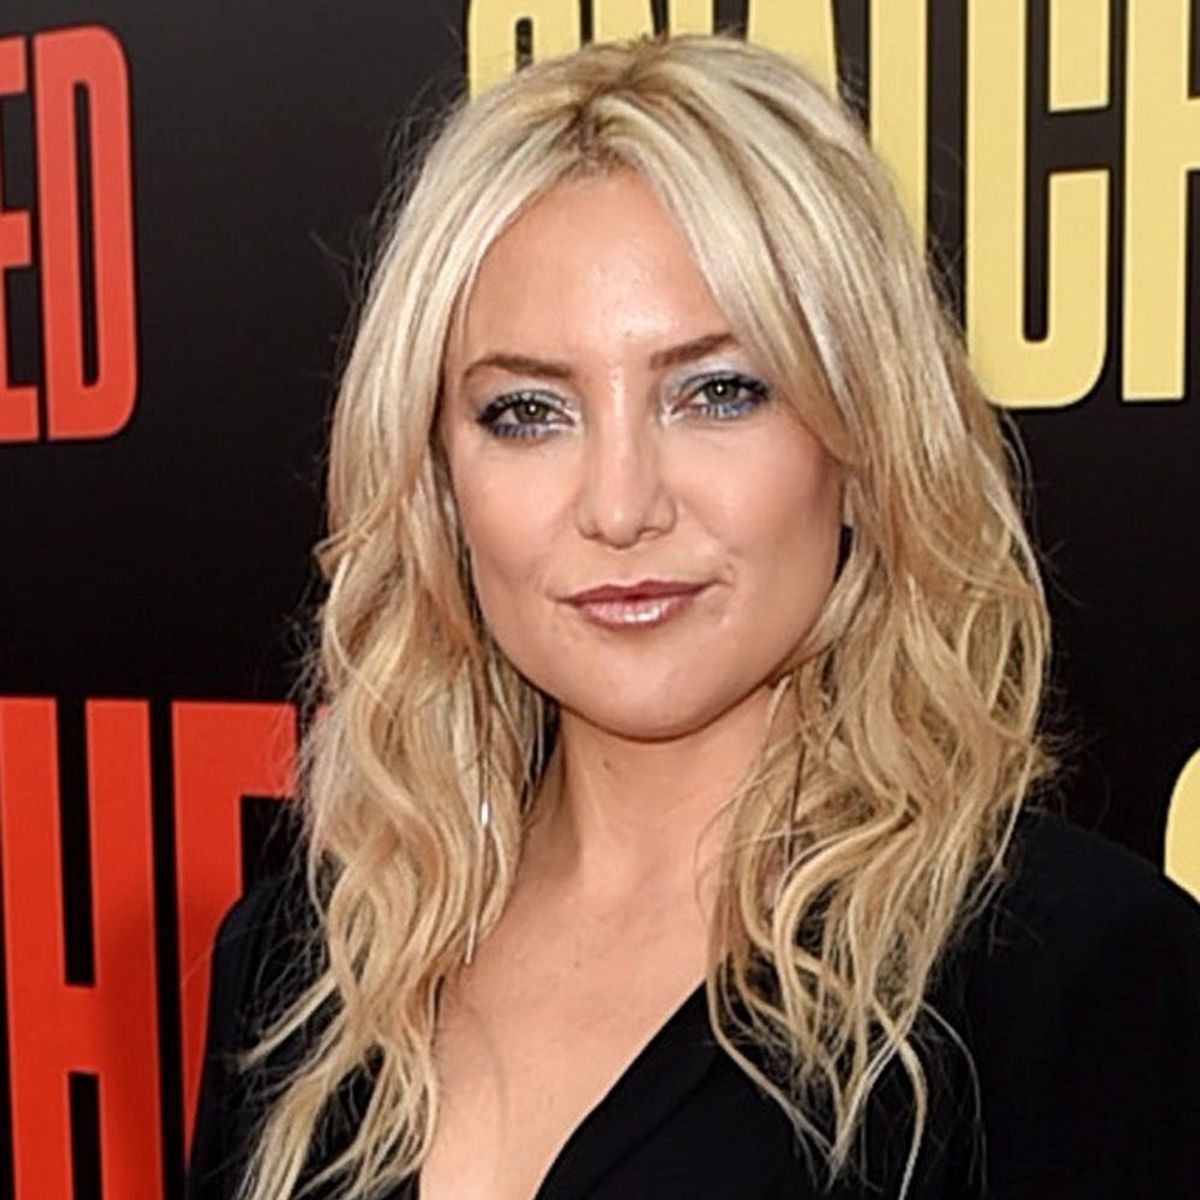 Kate Hudson Is Under Fire for *This* Controversial Comment About C-Sections